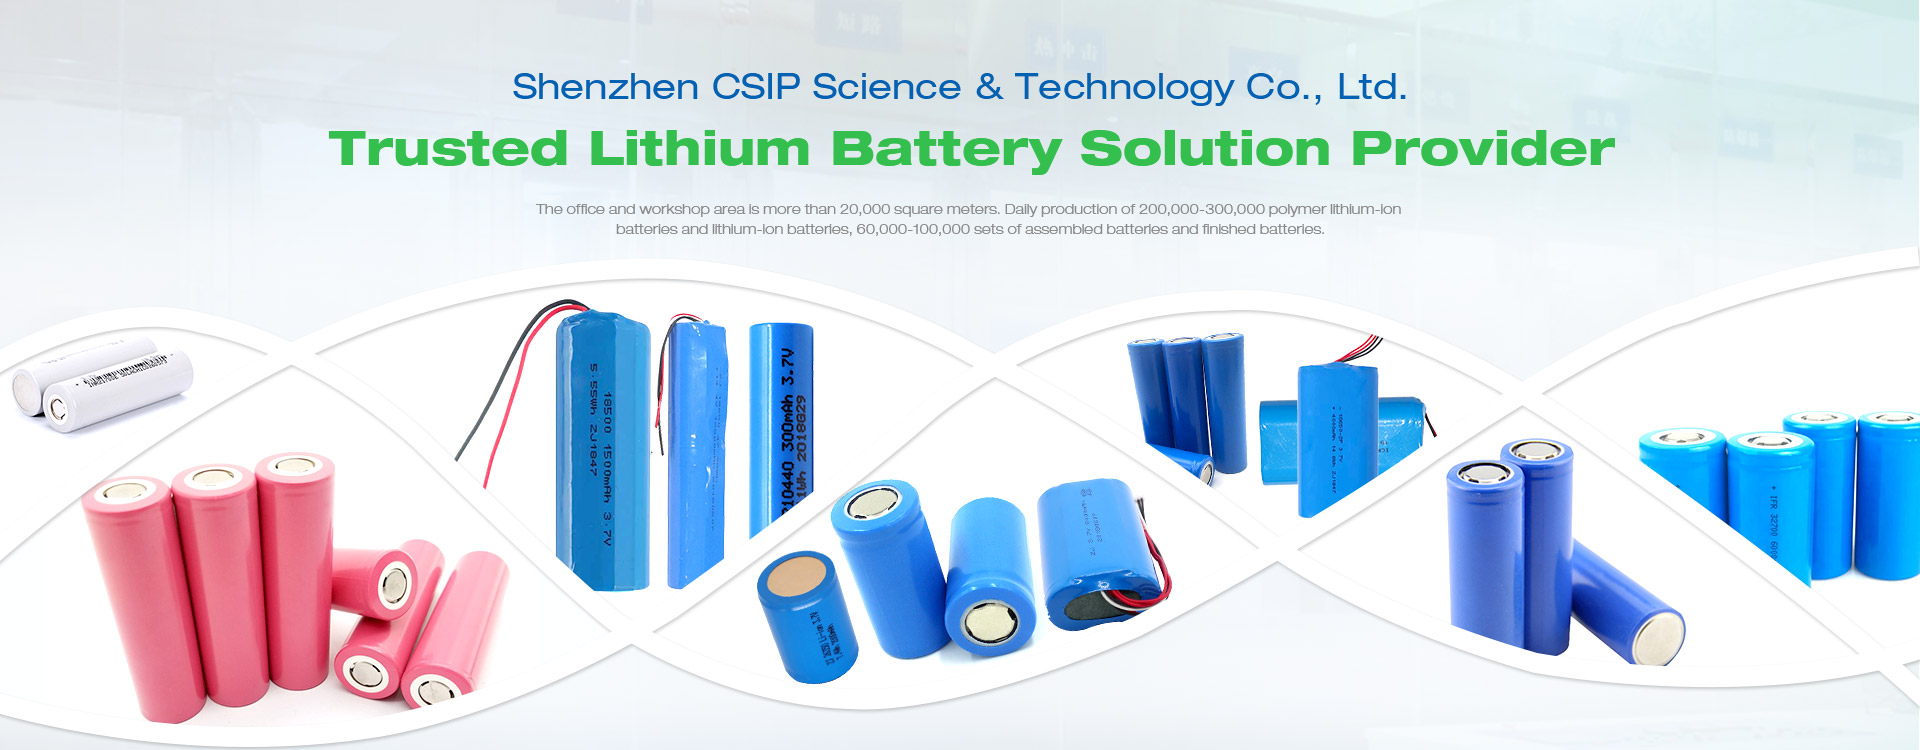 Pile rechargeable lithium-ion - AS-18650-2600 - Shenzhen AS Power